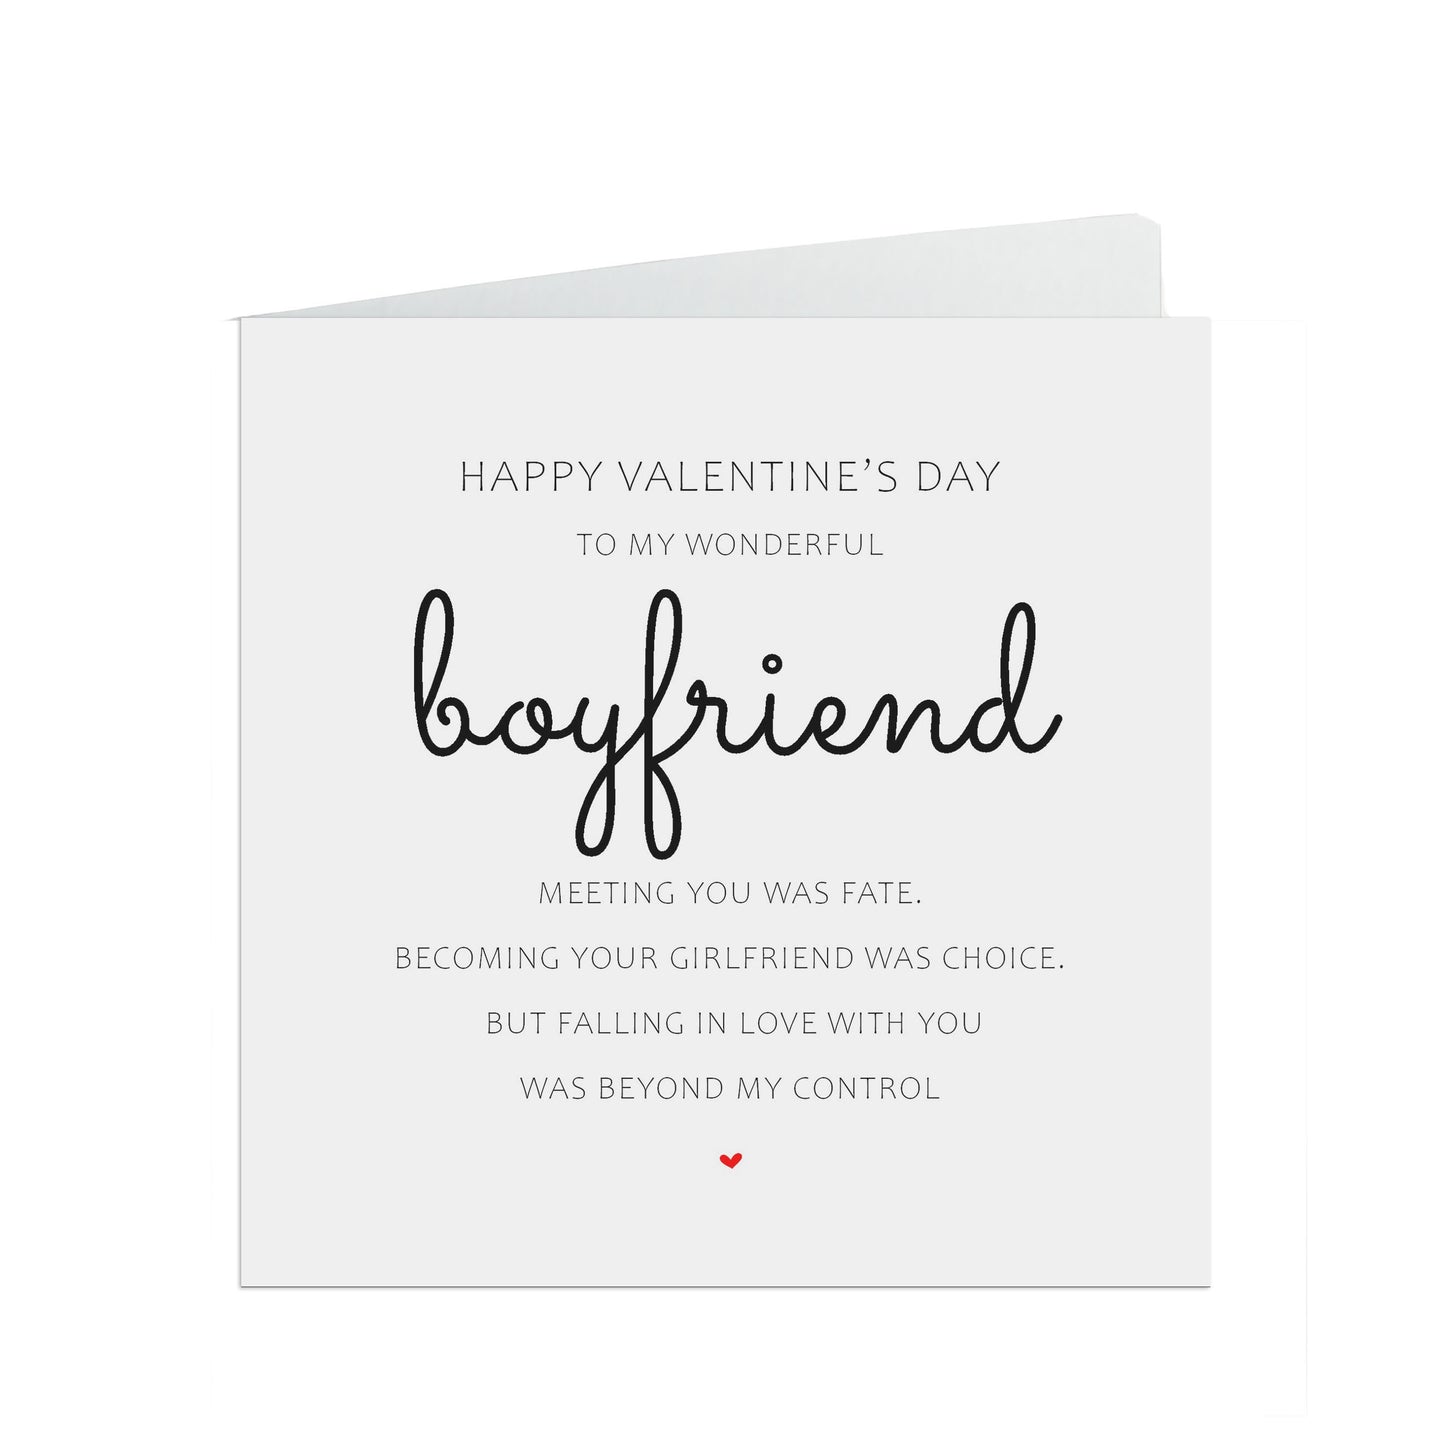 Boyfriend Valentine's Day Card - Romantic Meeting You Was Fate